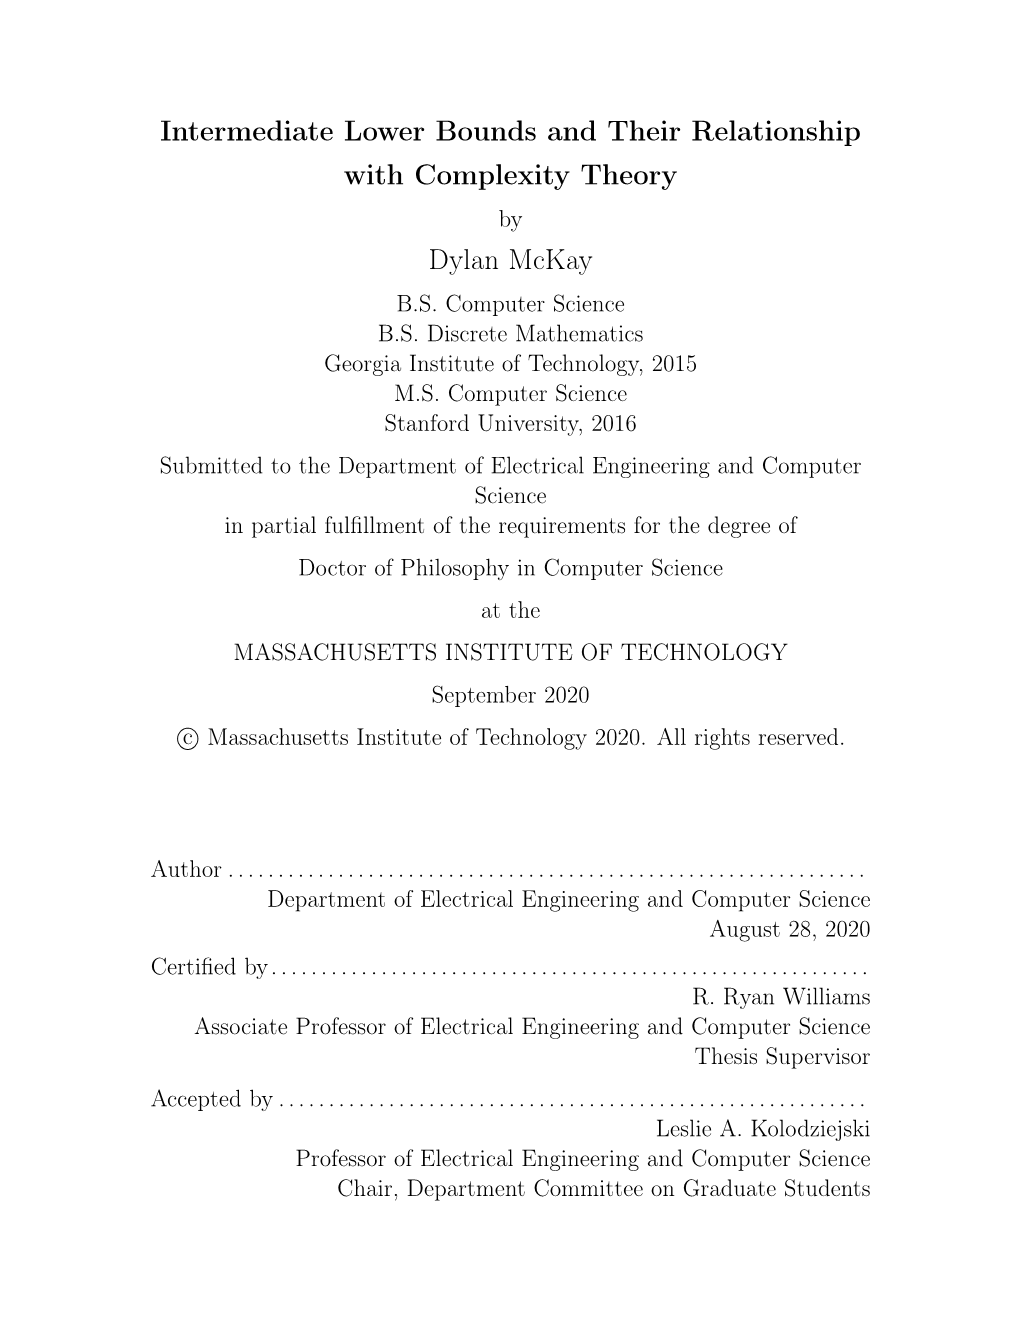 Intermediate Lower Bounds and Their Relationship with Complexity Theory by Dylan Mckay B.S